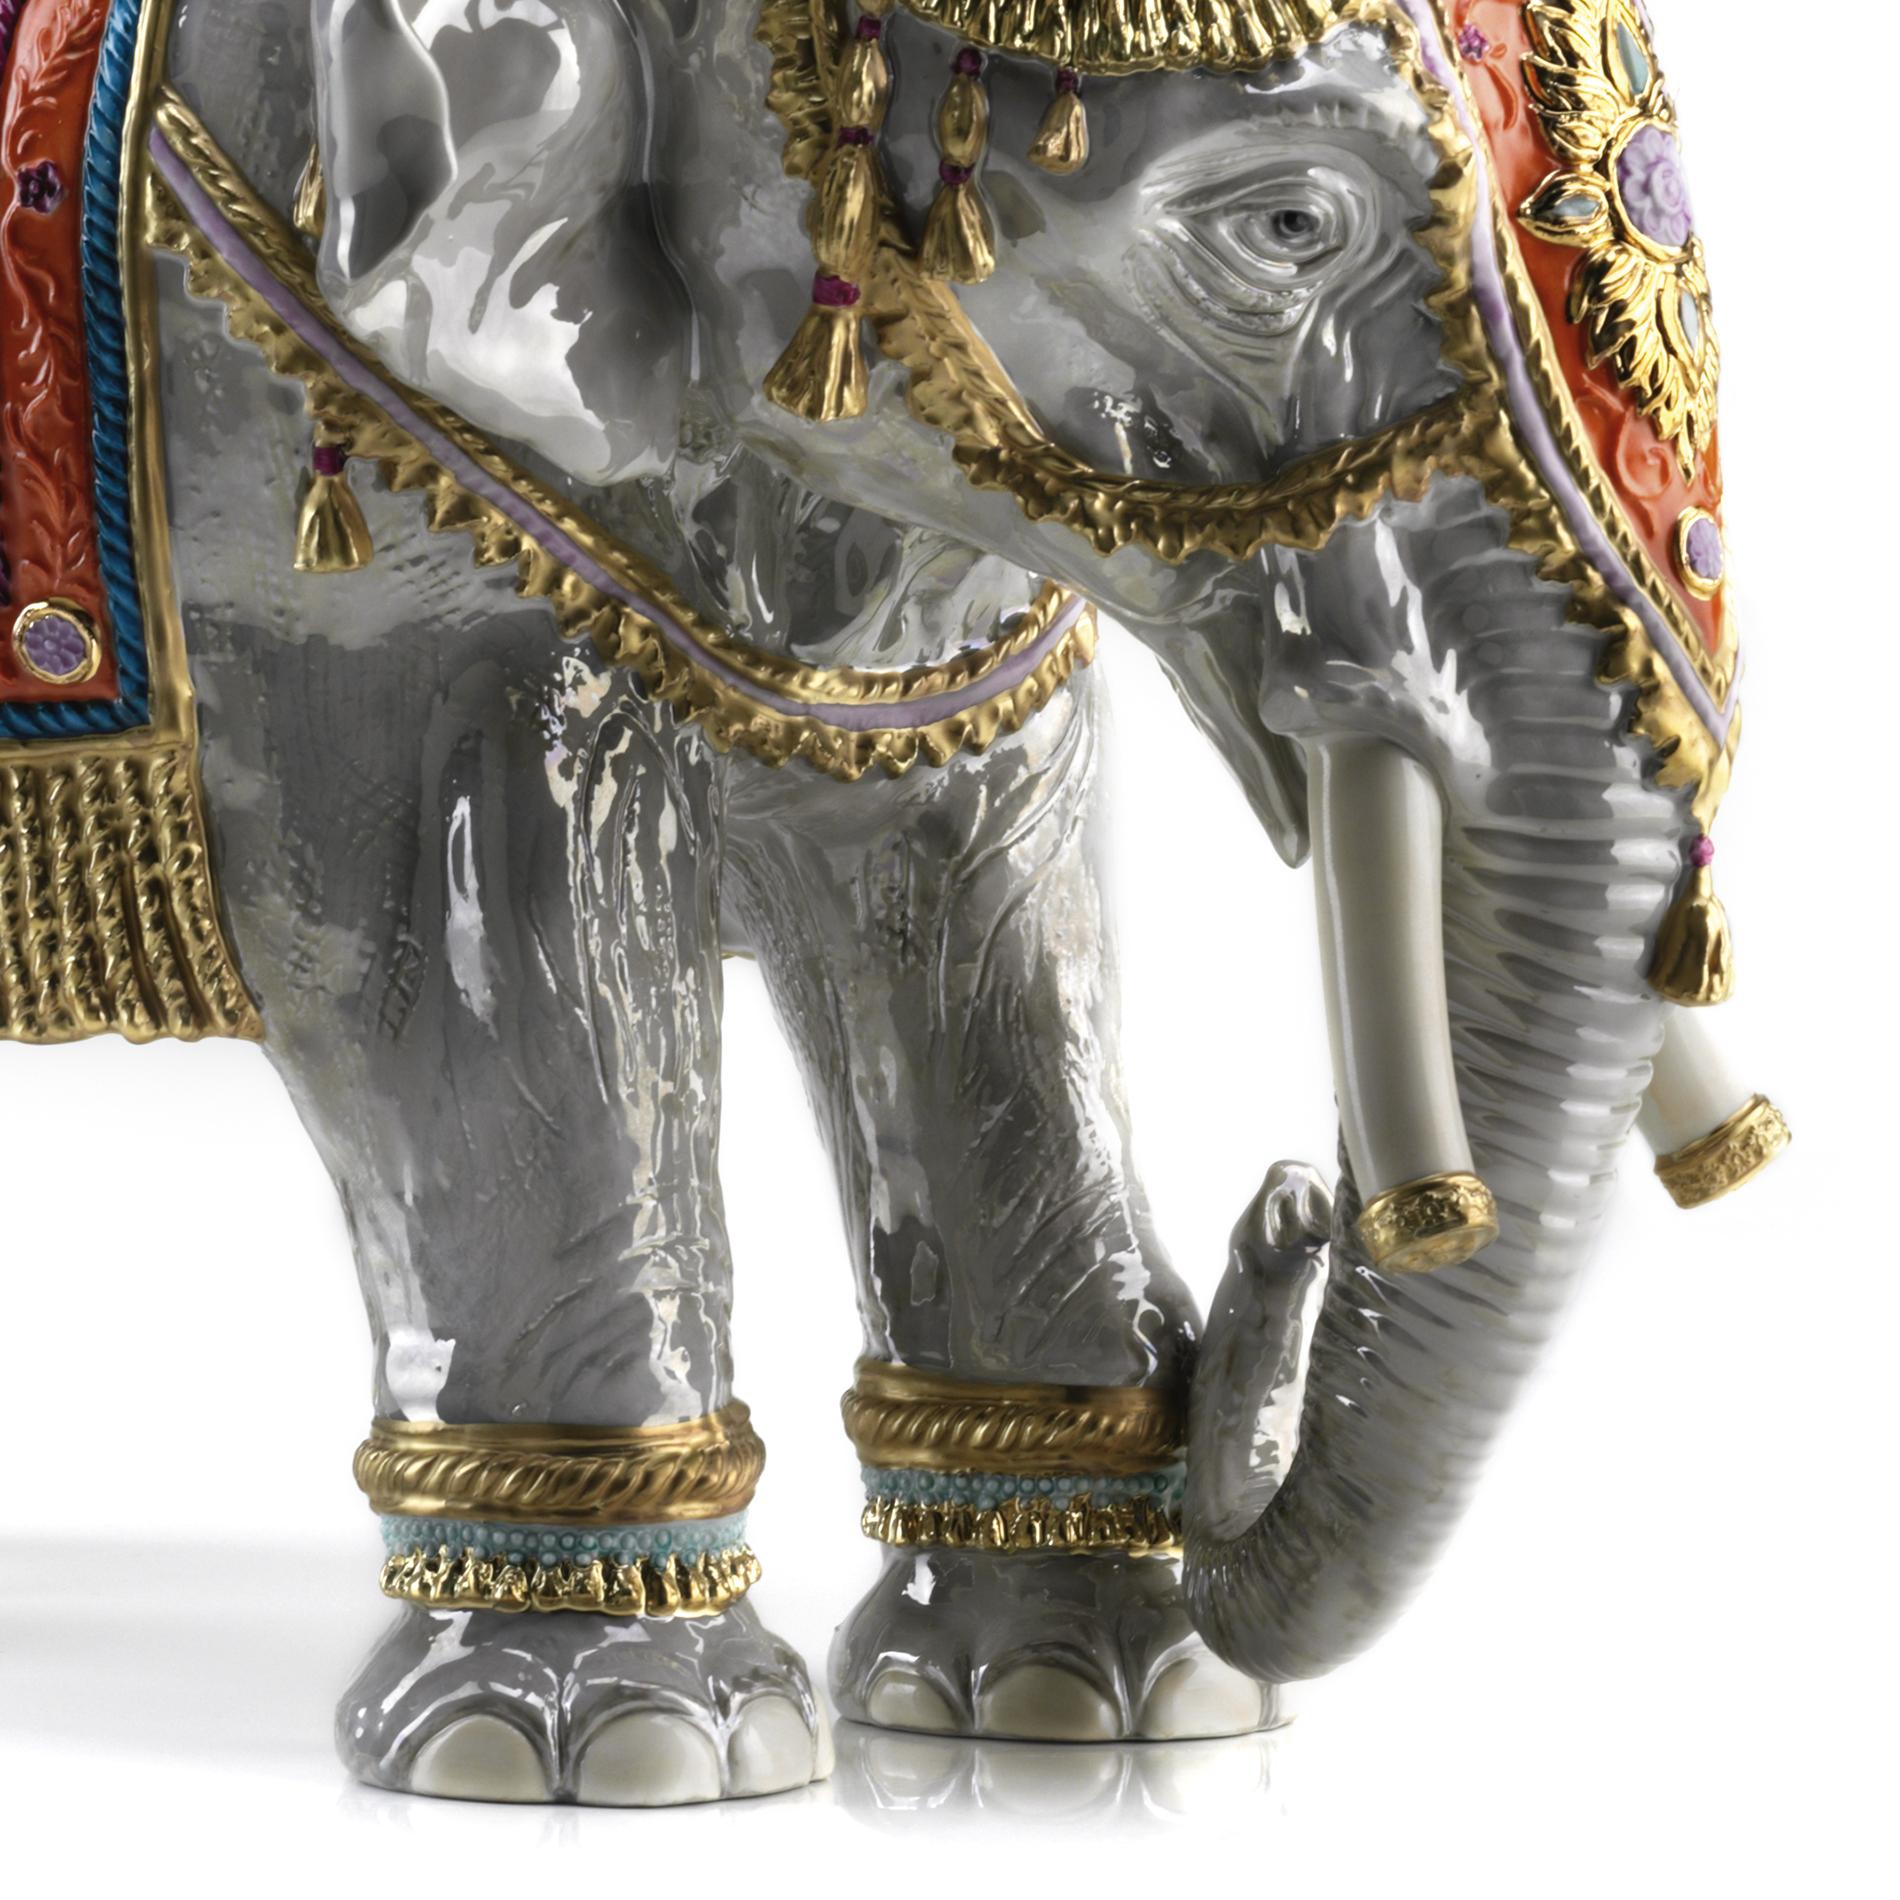 Hand-Crafted Udaipur Red Elephant Sculpture For Sale